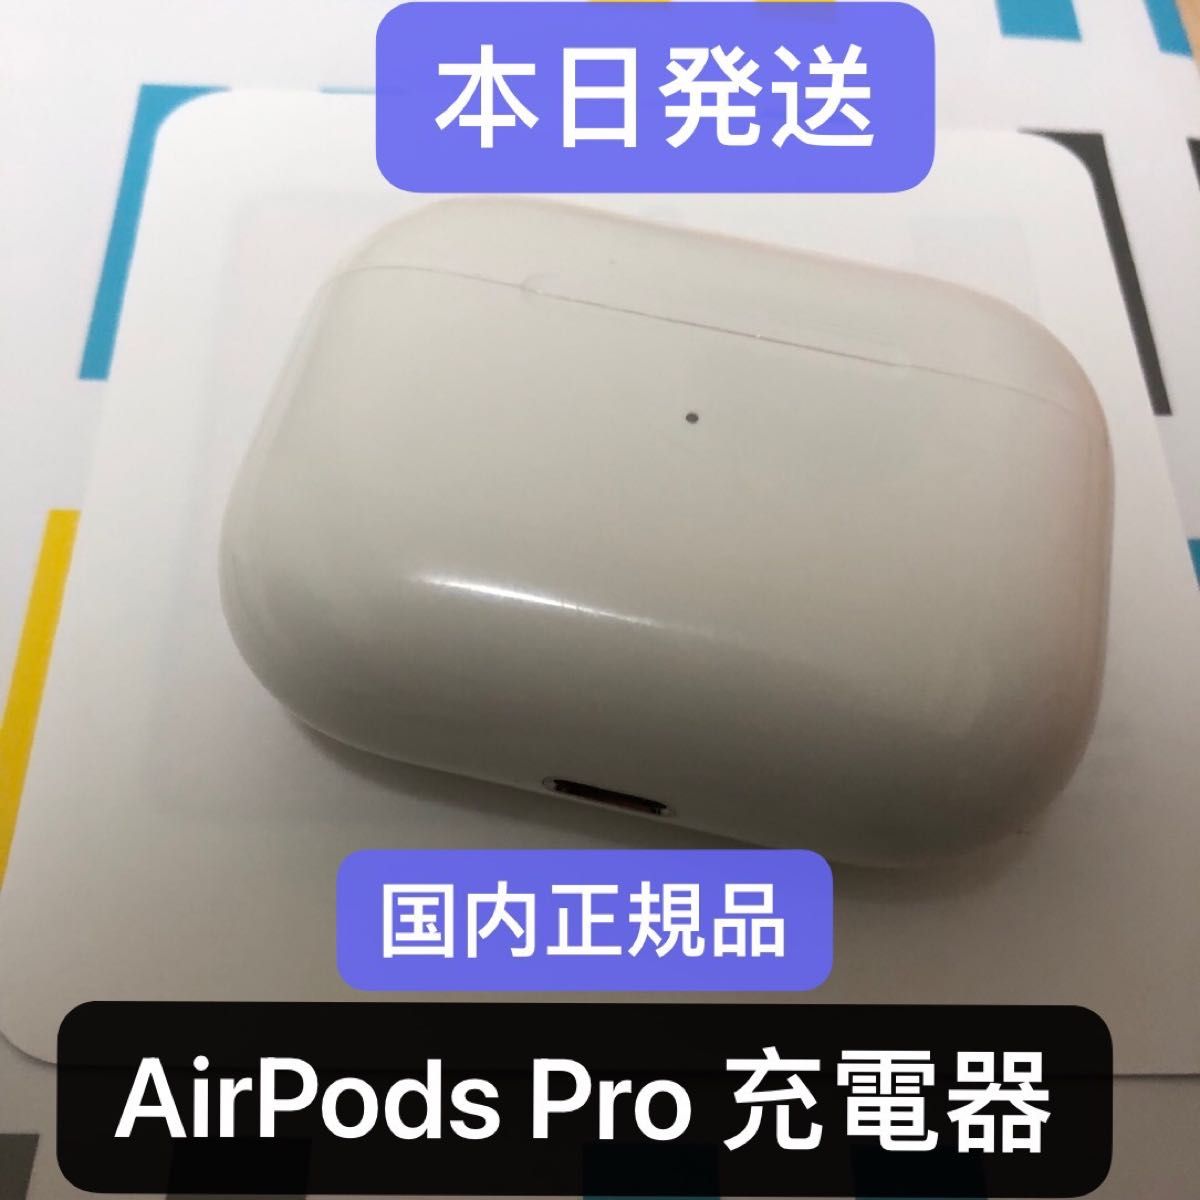 Apple AirPods Pro 充電ケース 正規品 エアーポッズ｜PayPayフリマ